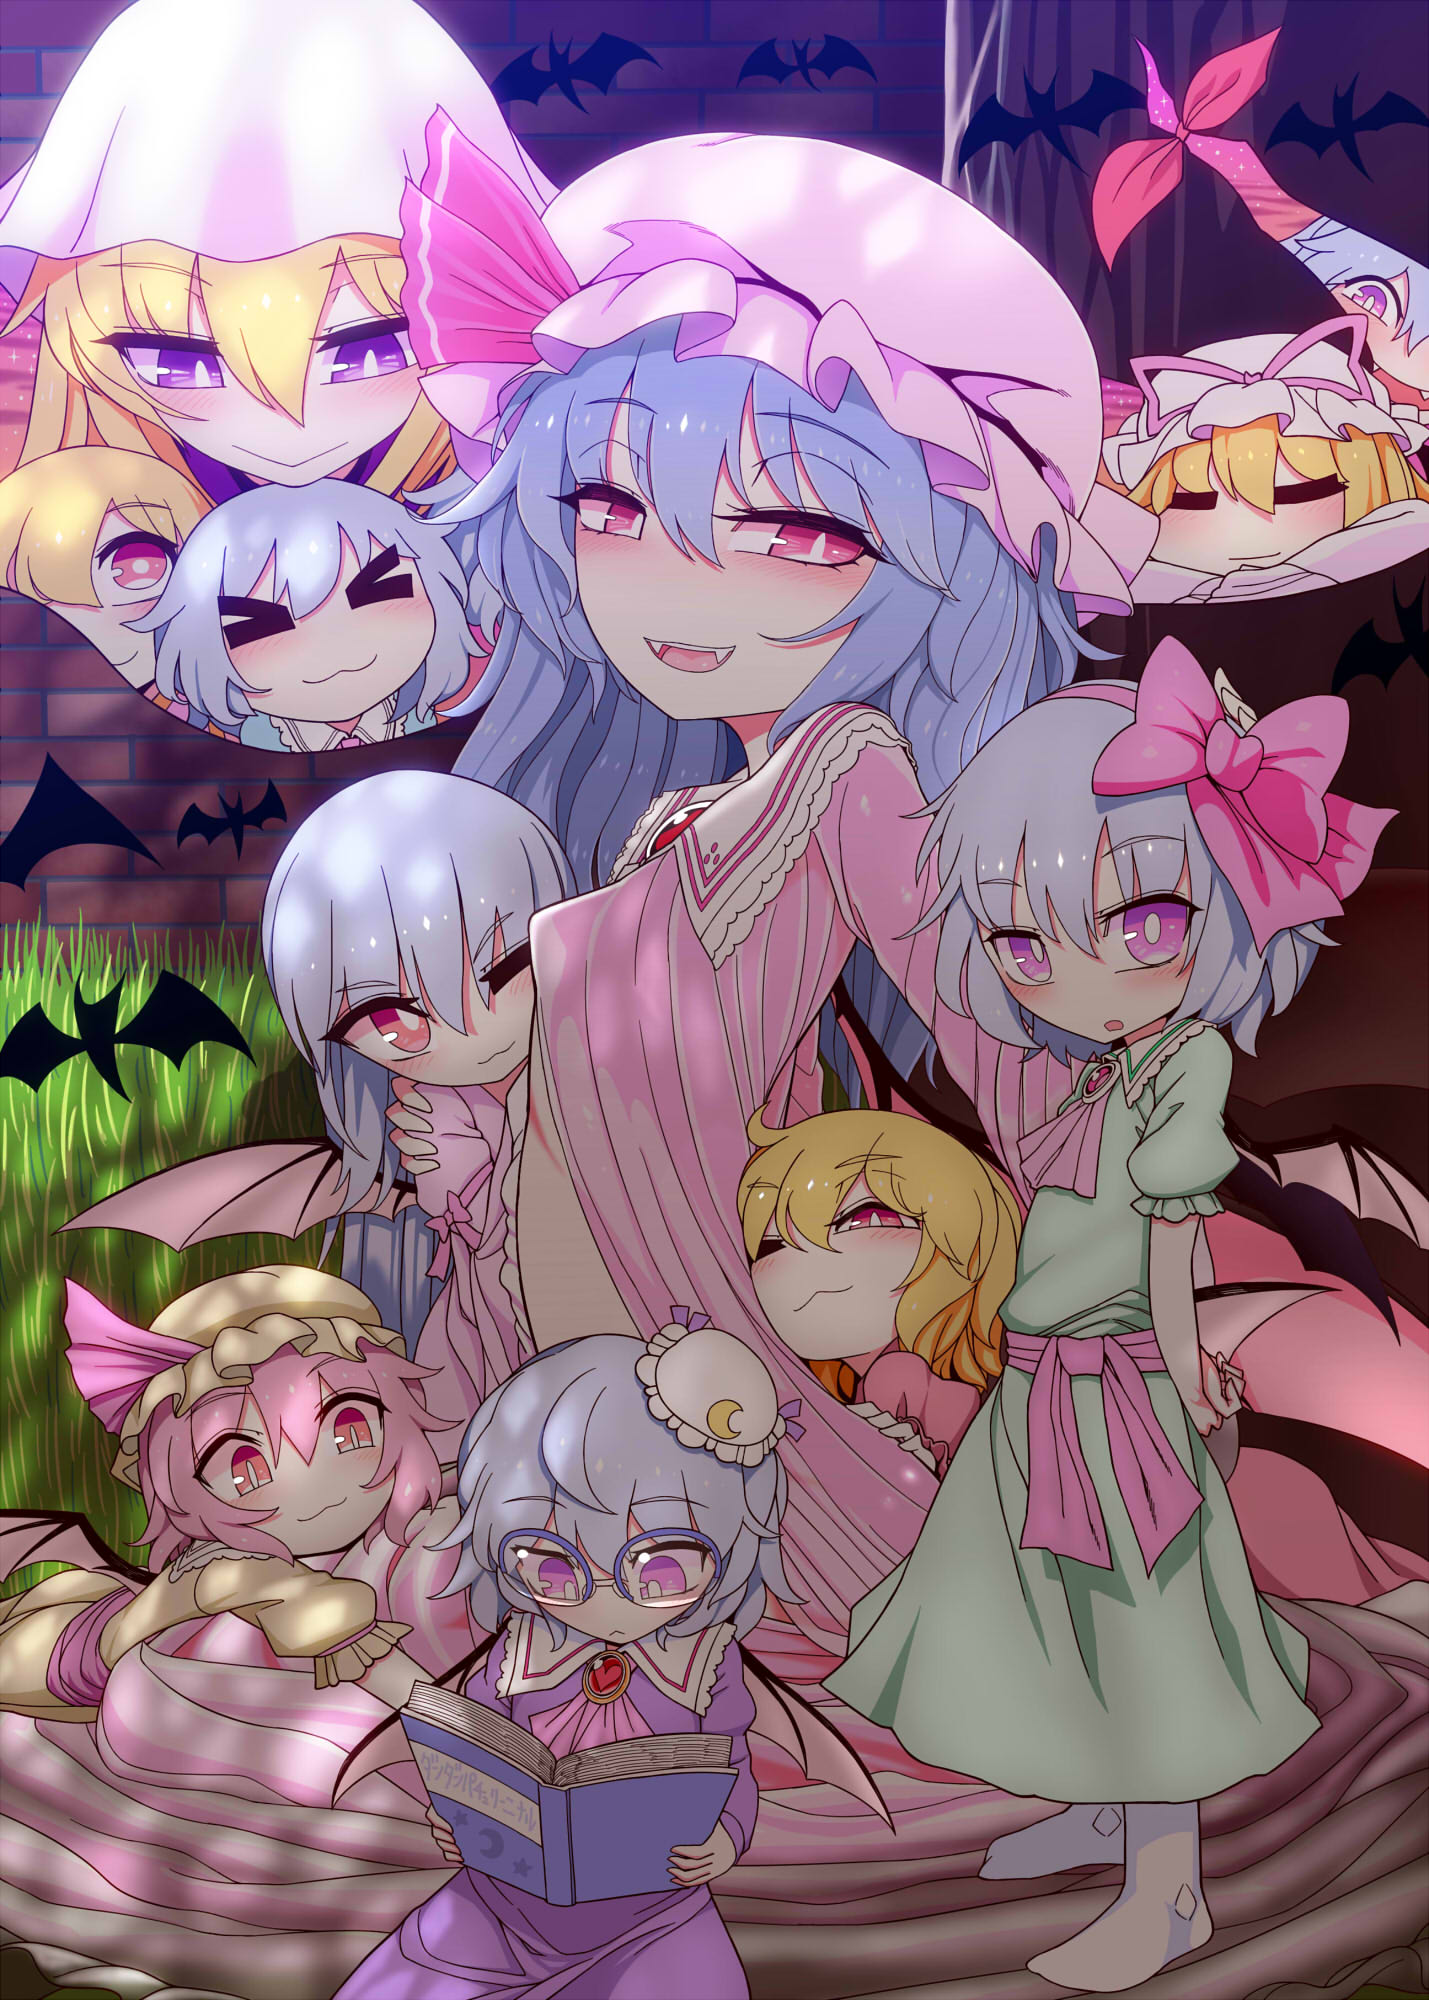 6+girls bat_wings blonde_hair blue_hair book bow commentary_request dress gap_(touhou) glasses hair_bow hat hat_ribbon highres if_they_mated long_hair long_sleeves looking_at_viewer mob_cap multiple_girls open_mouth pink_hair purple_eyes reading red_eyes remilia_scarlet ribbon short_hair smile touhou wings yakumo_yukari yassy